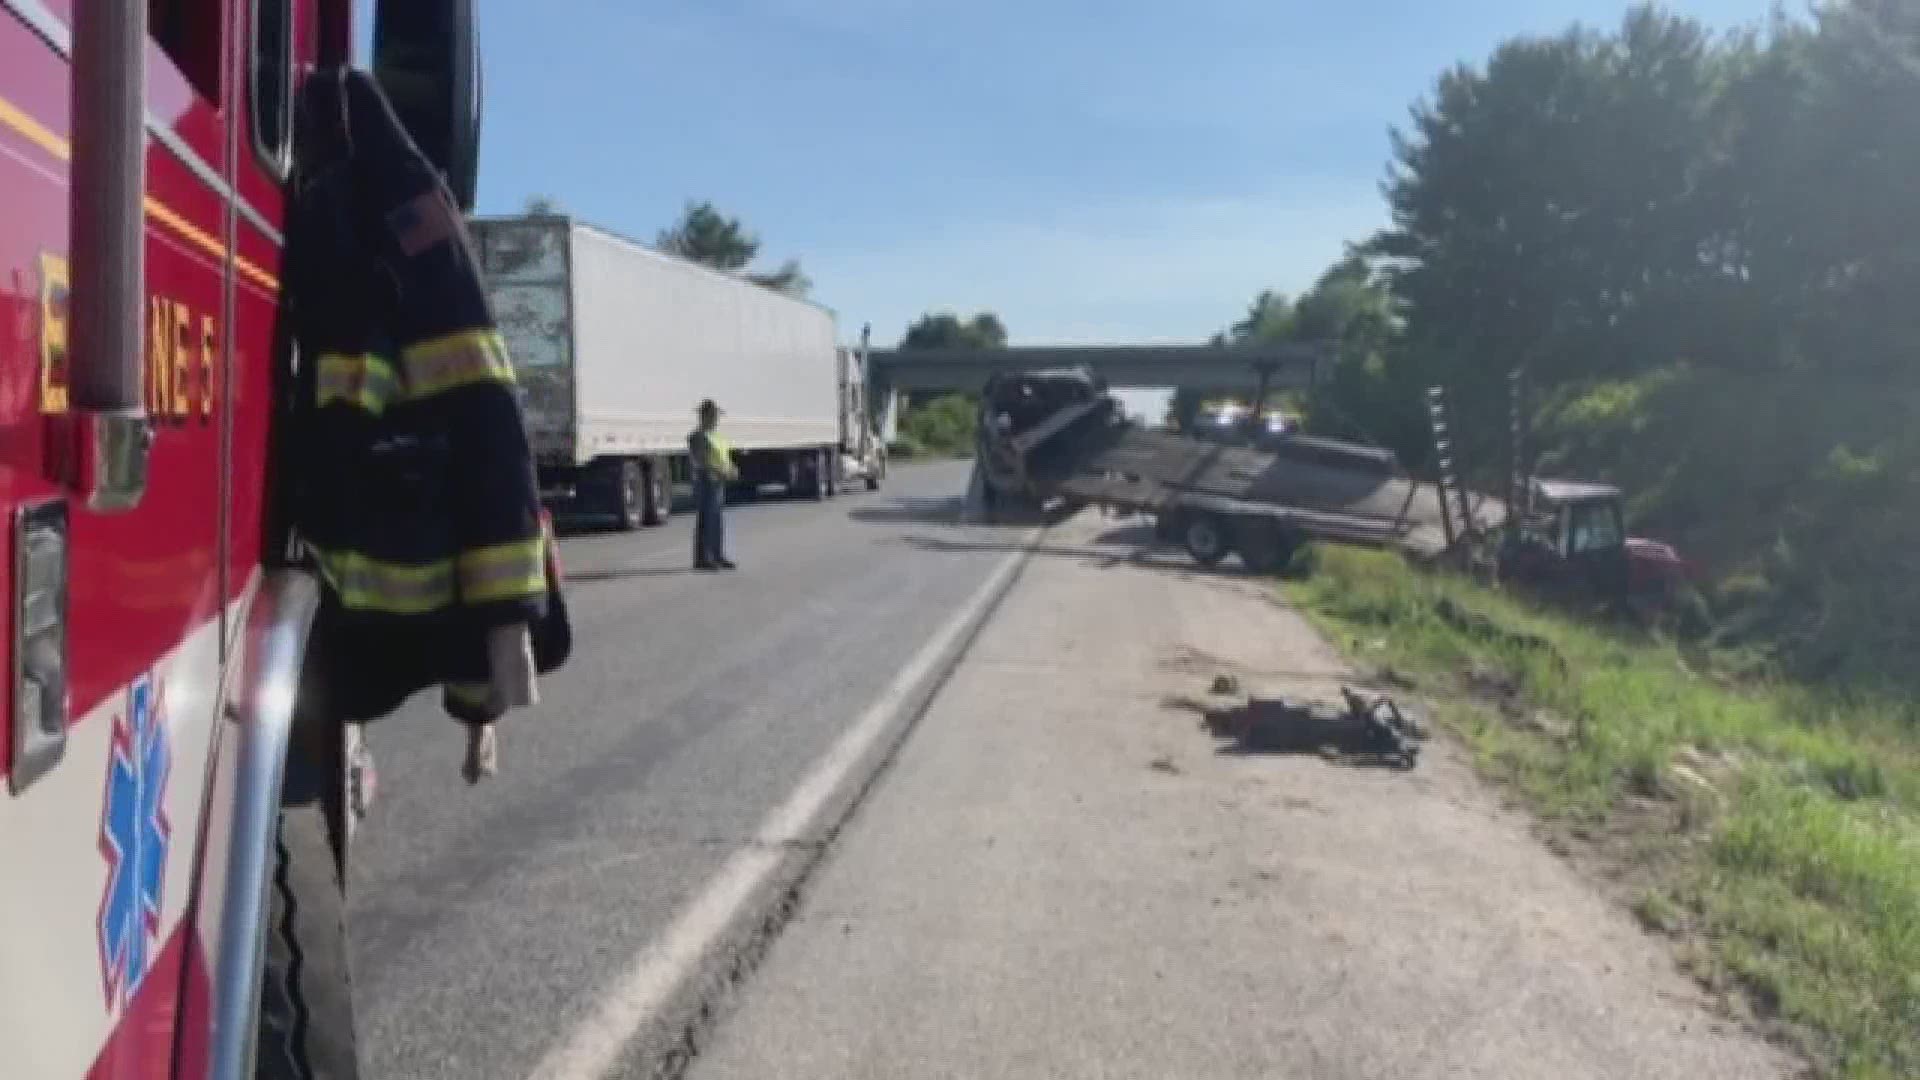 According to police, more than a dozen people stopped on I-95 to help Wesley Donnellan out of his truck after he lost control and jack-knifed into a ditch.